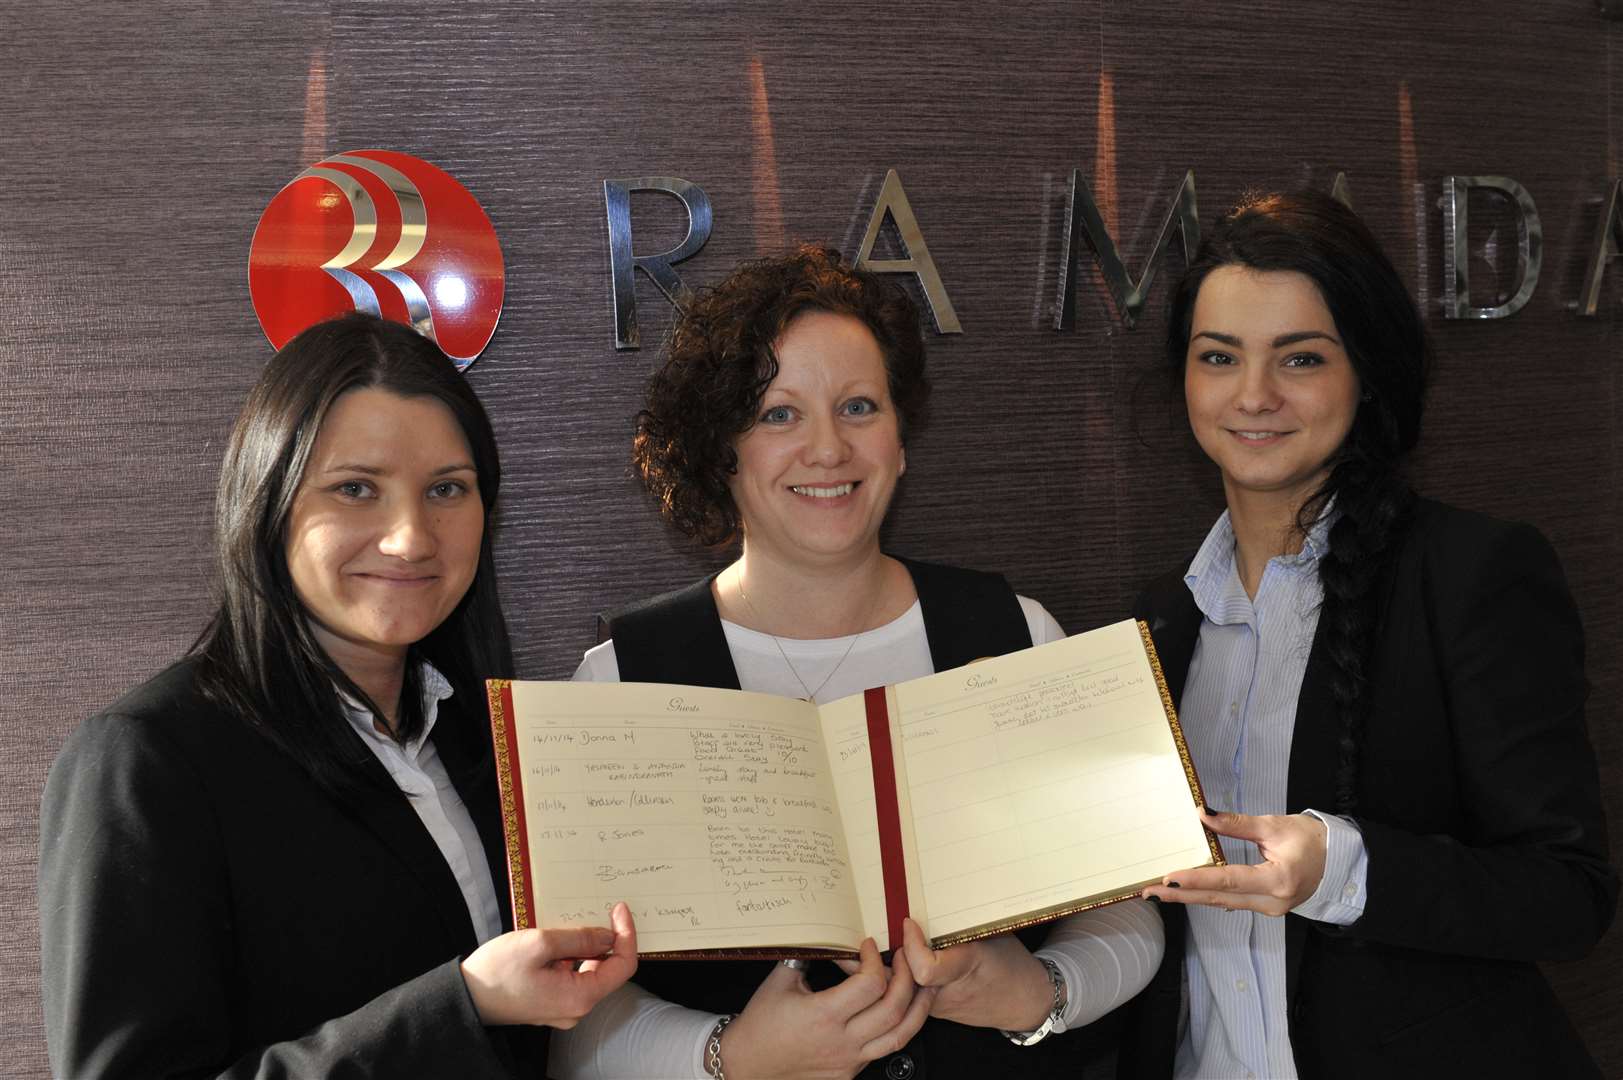 Hotel workers; Anna Brzozka, Sue Piddock and Andreea Gainariu hold up the guest book with Benedict Cumberbatch's kind words